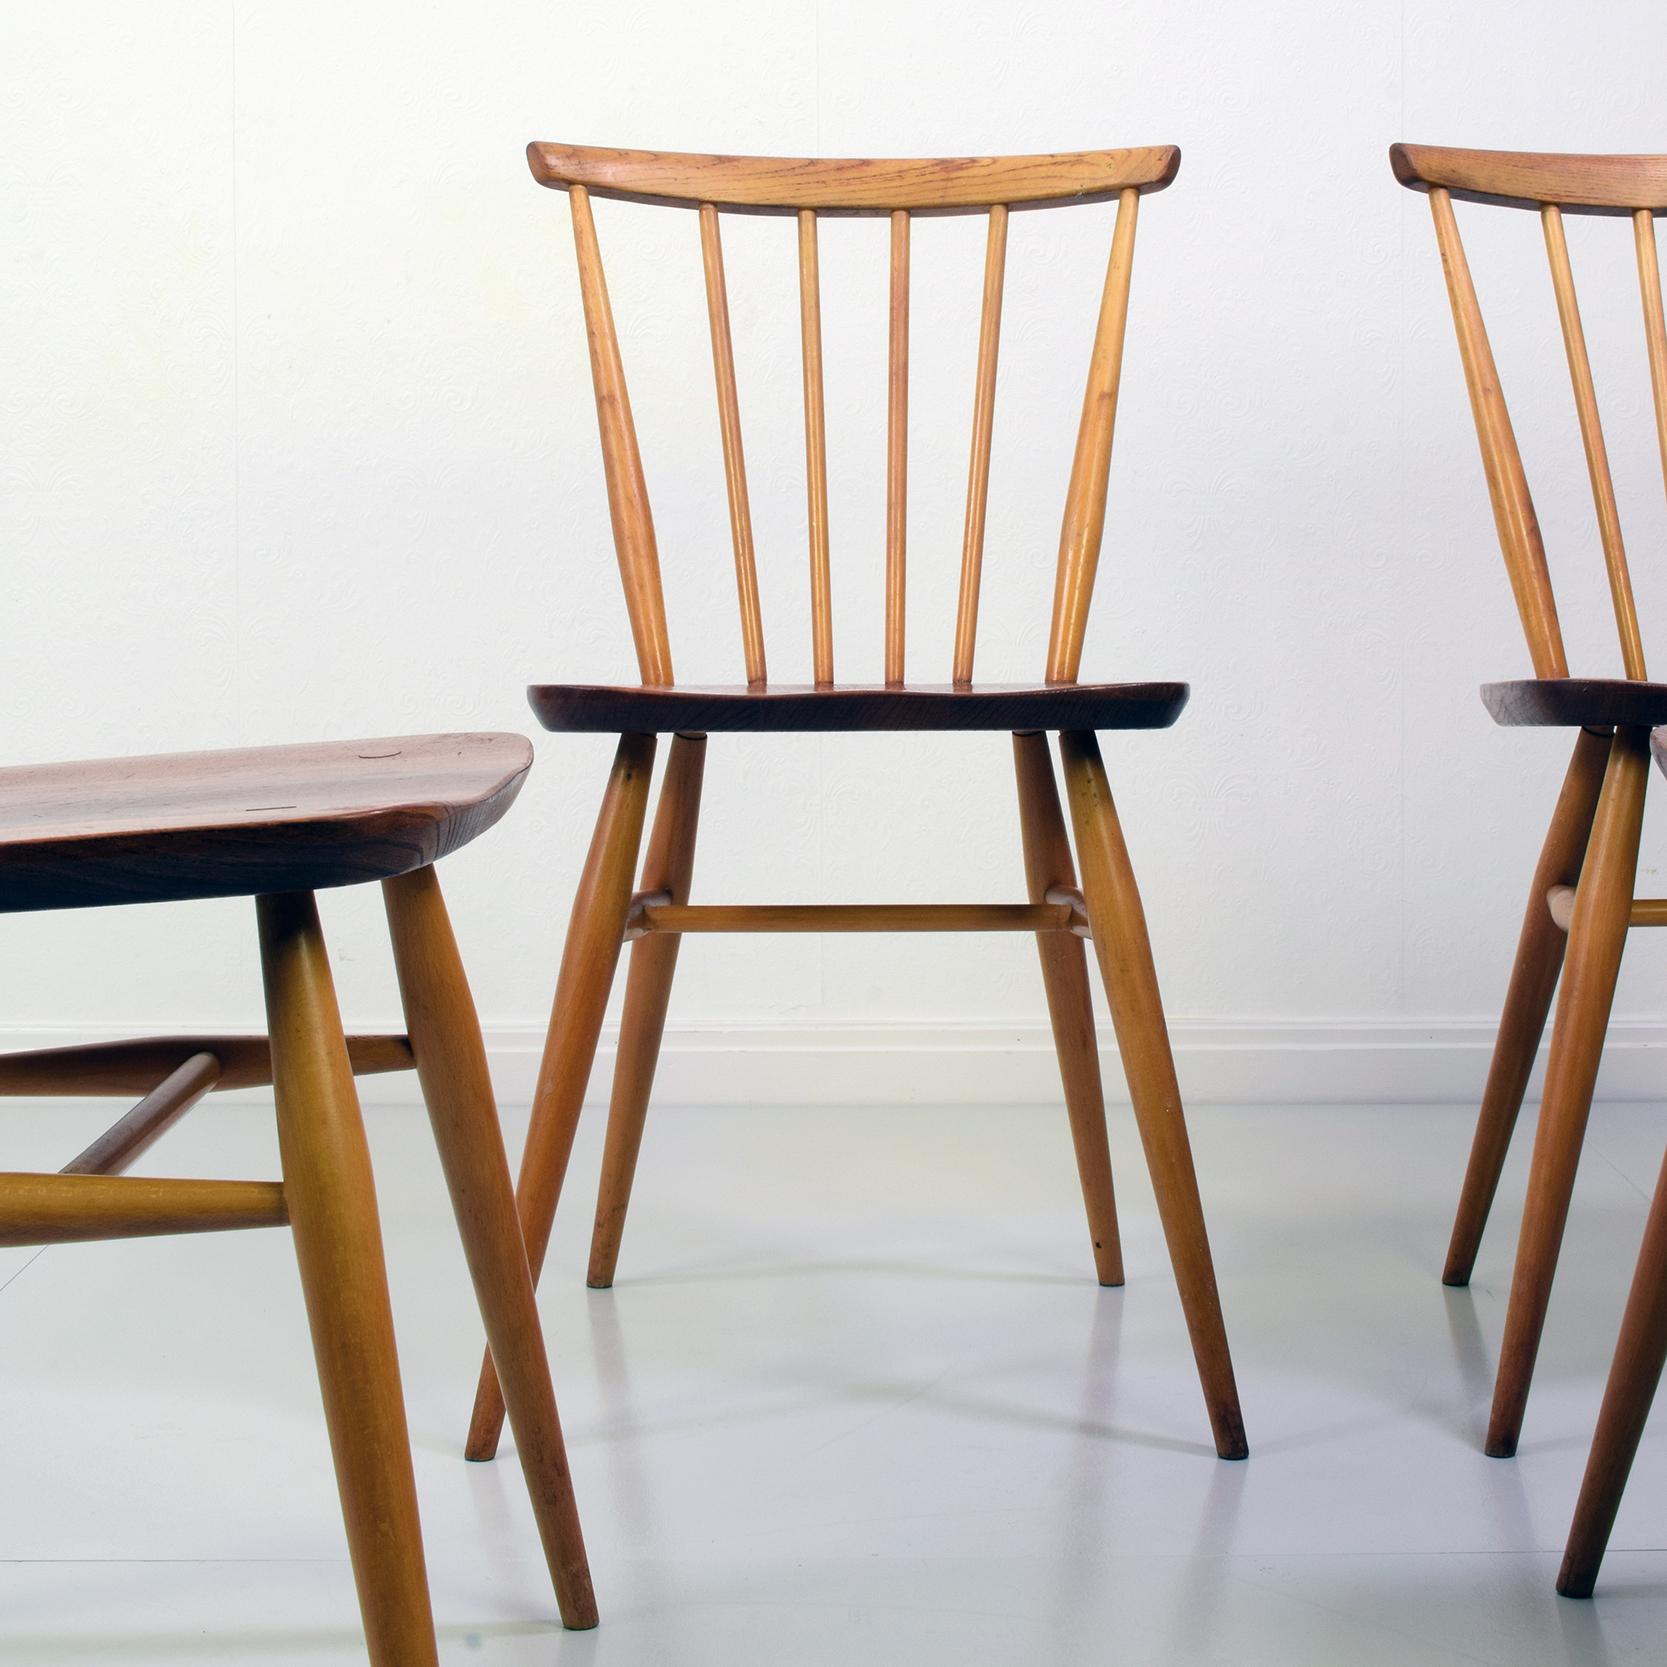 20th Century Ercol Model 737 'Chiltern' 'Swept-Back' Chairs, Set of Four